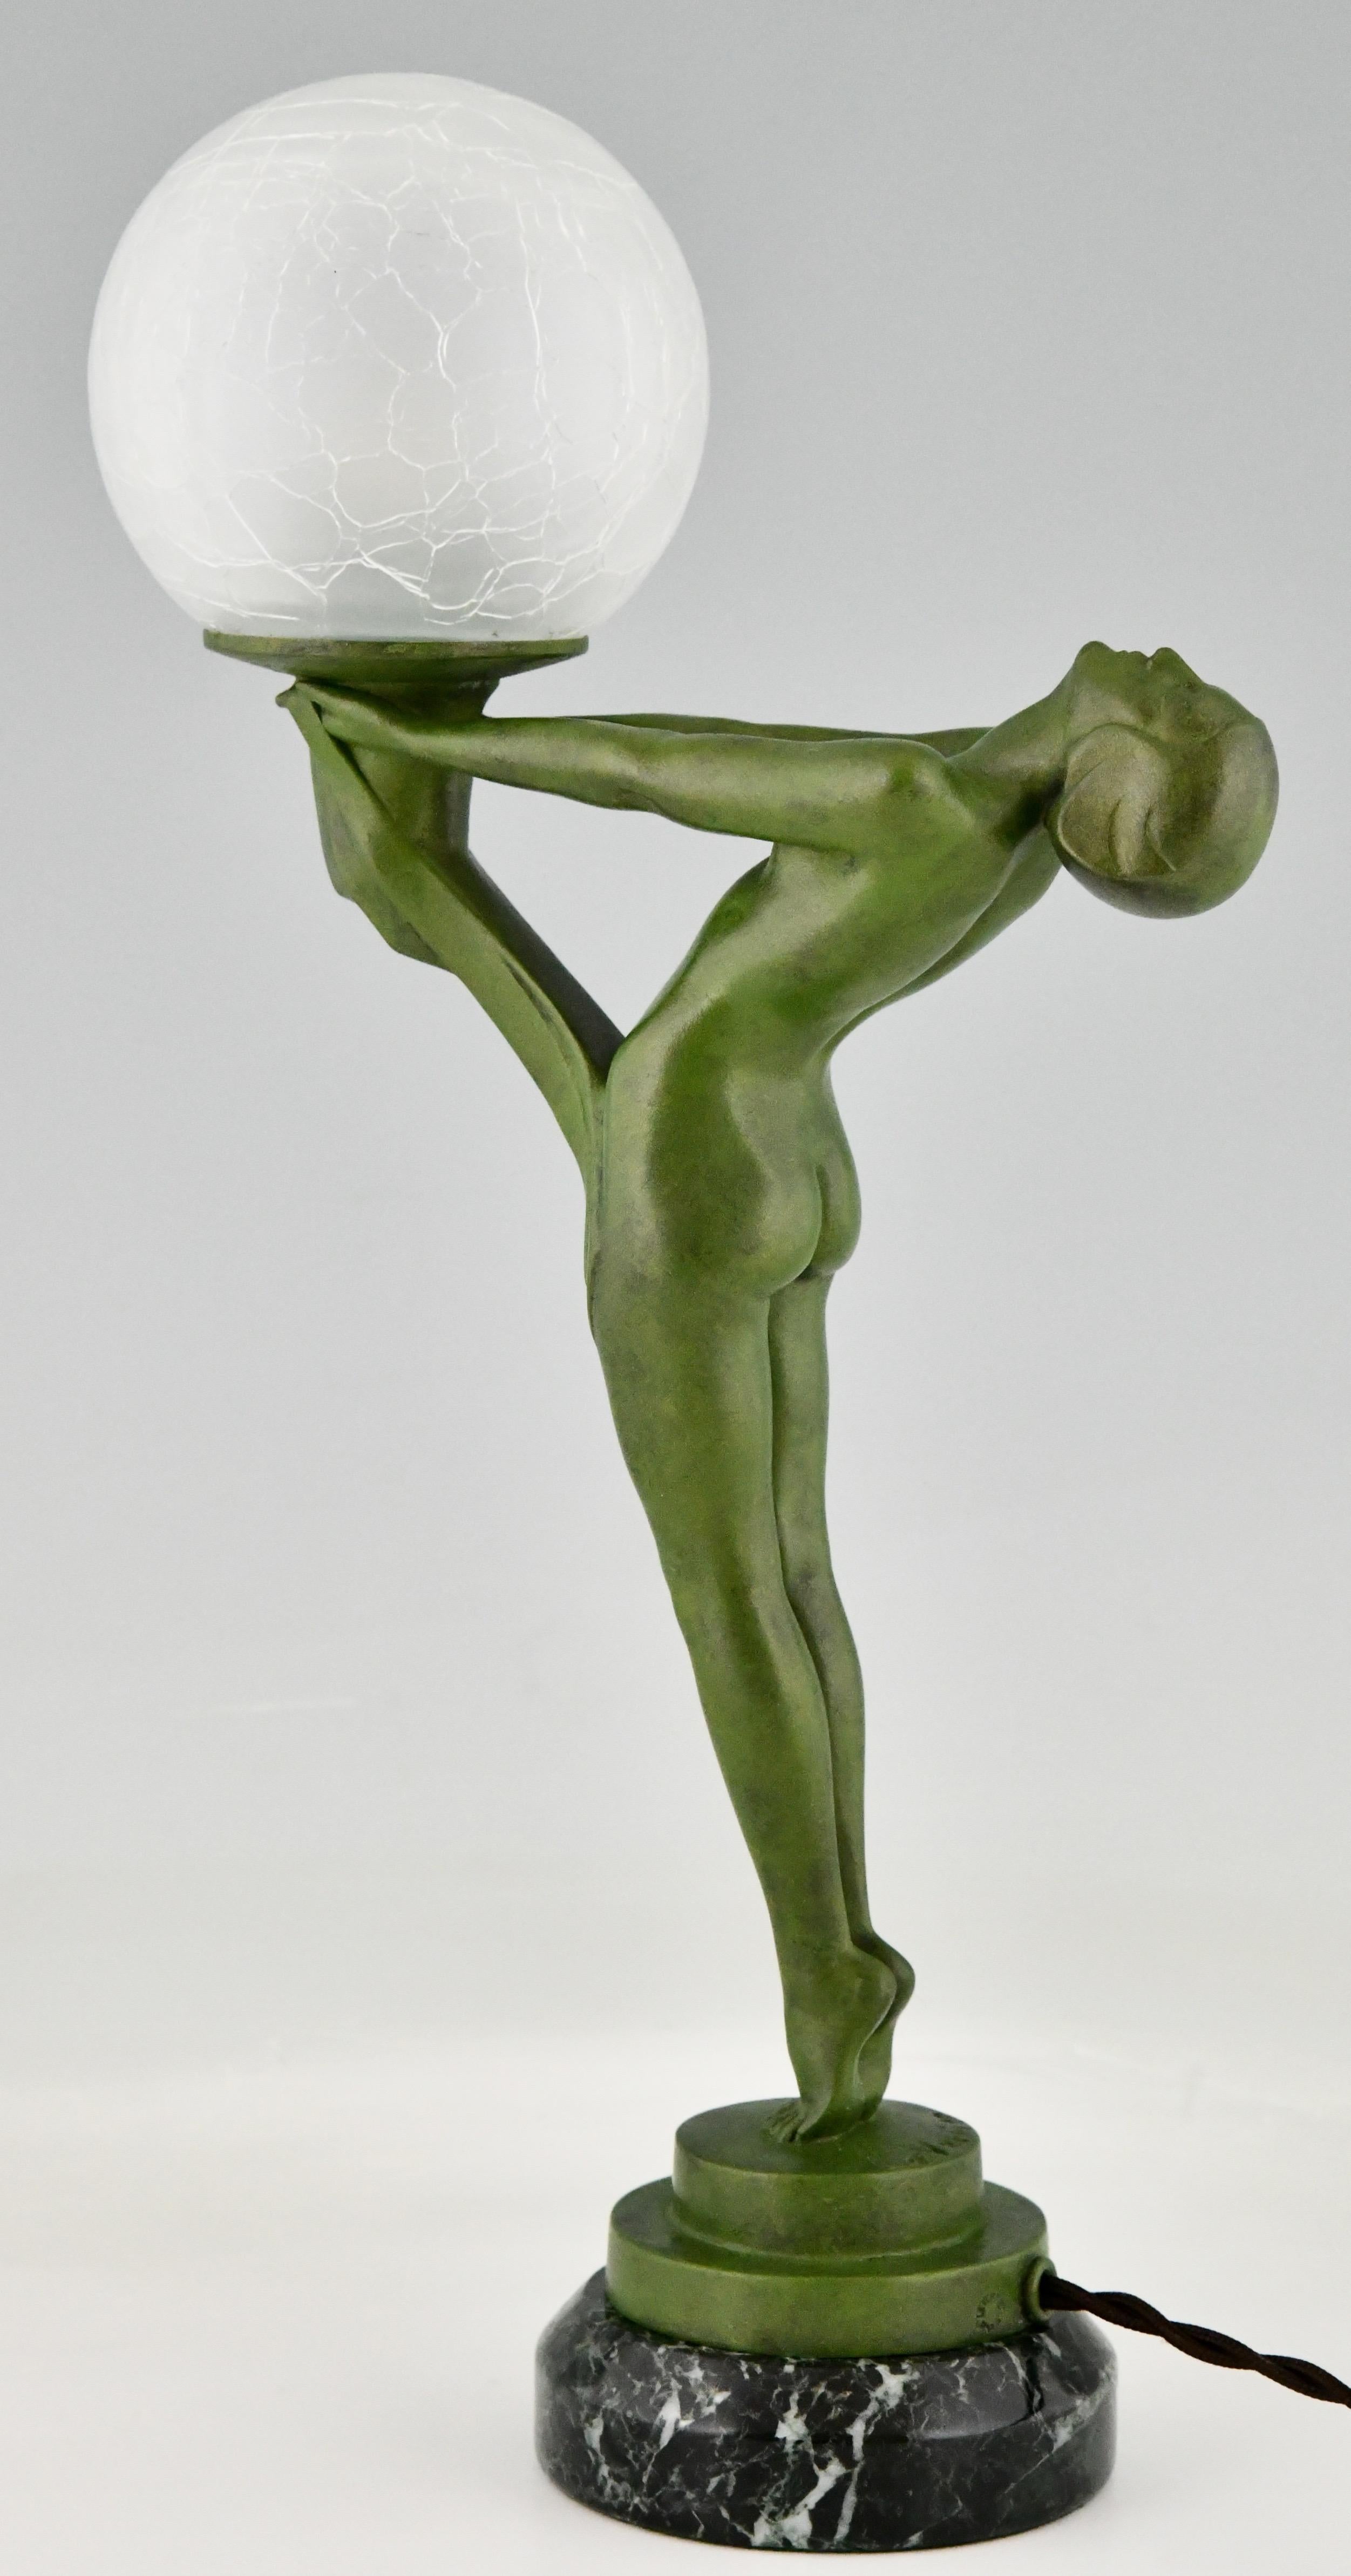 Art Deco Lamp Standing Nude with Ball Clarté by Max Le Verrier Original 1930 1